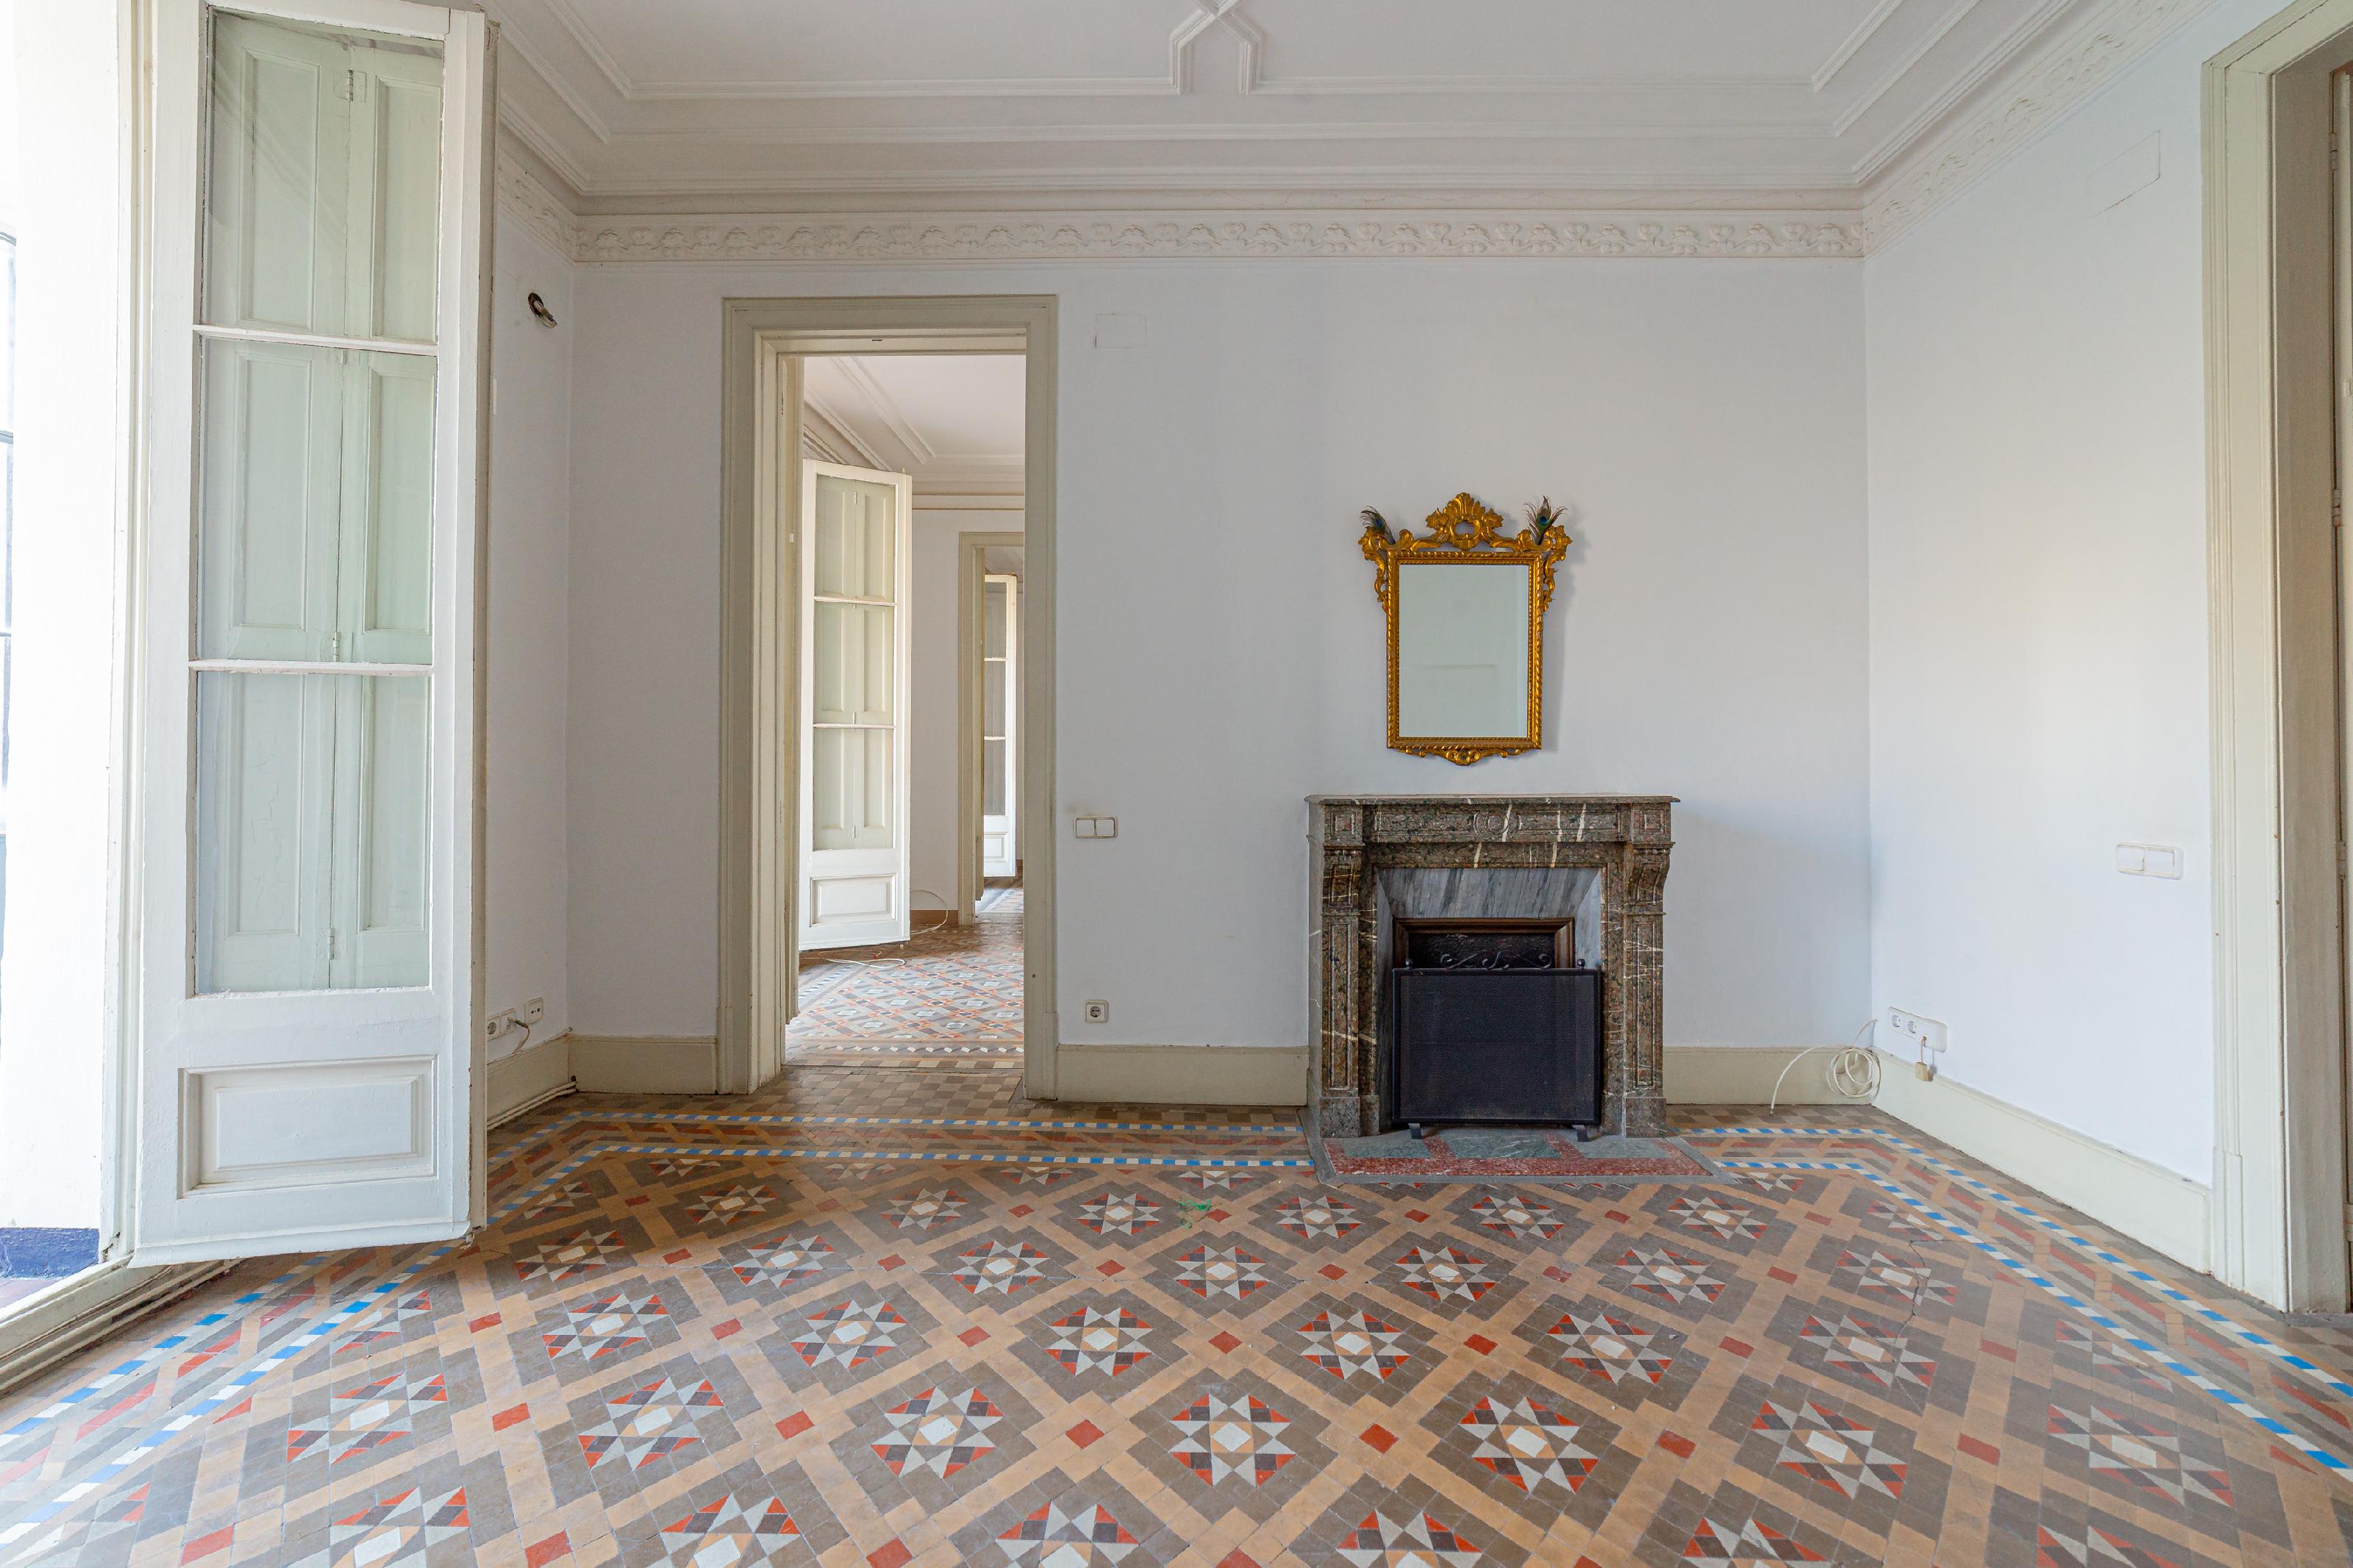 273416 Flat for sale in Eixample, Old Esquerre Eixample 8